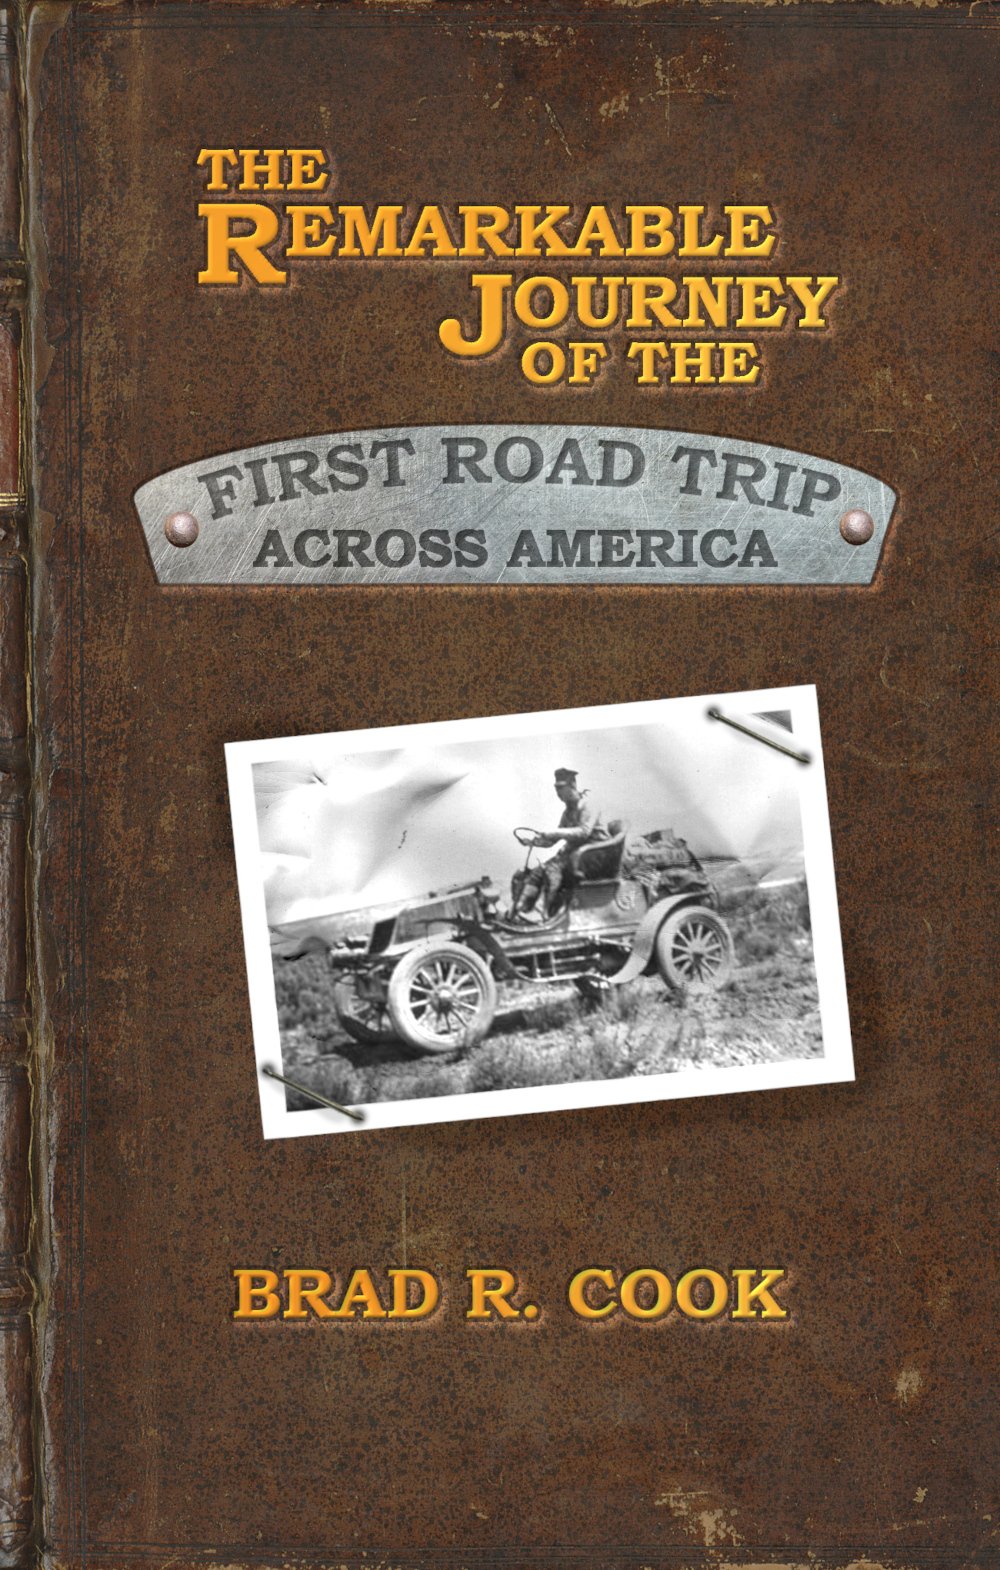 The Remarkable Journey of the First Road Trip by BRC Front Cover - Thumbnail.jpg